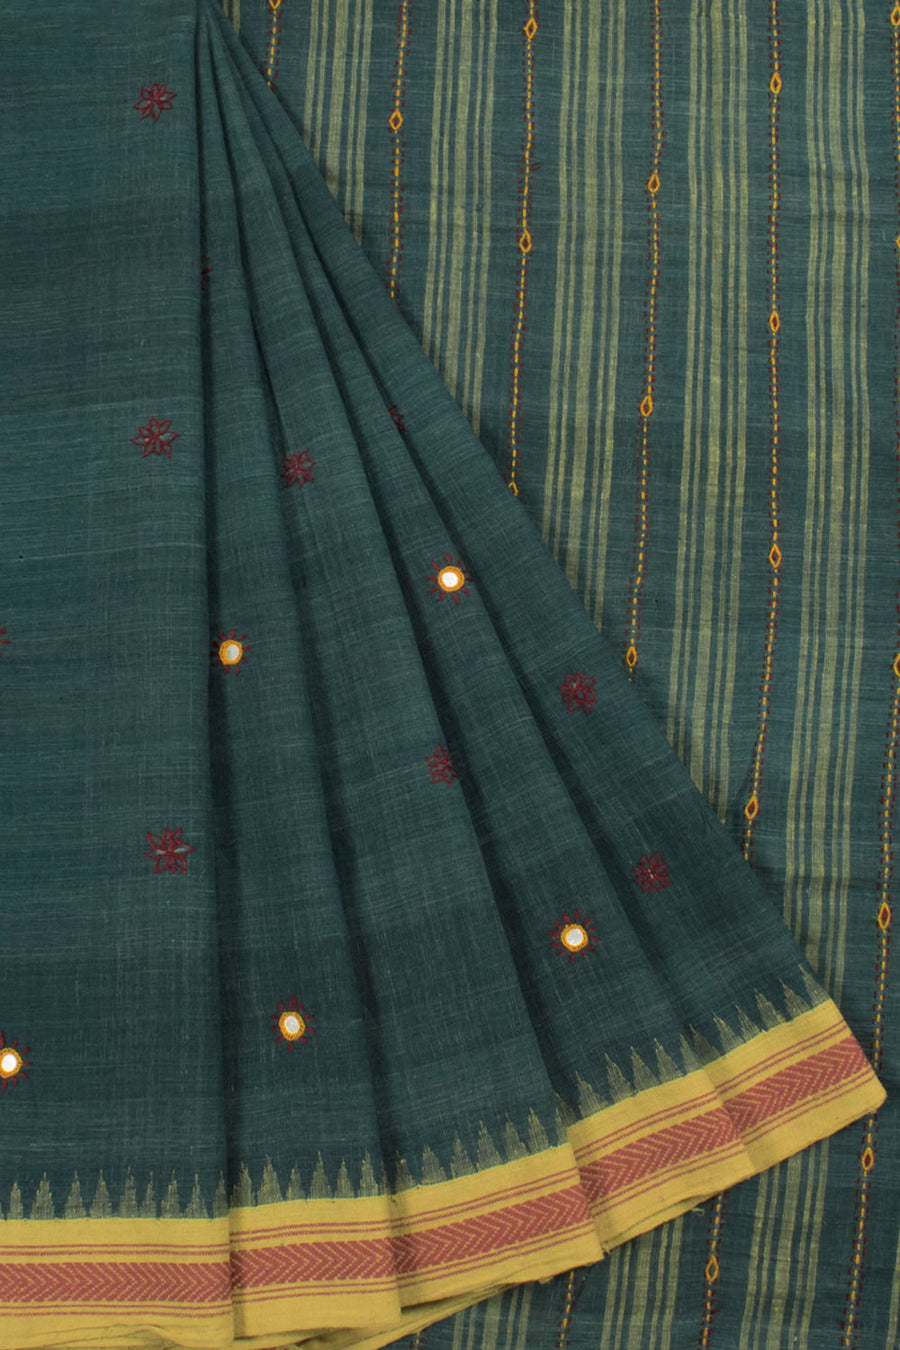 Handloom Natural Dye Khadi Cotton Saree with Mirror Work Embroidery and Temple Border